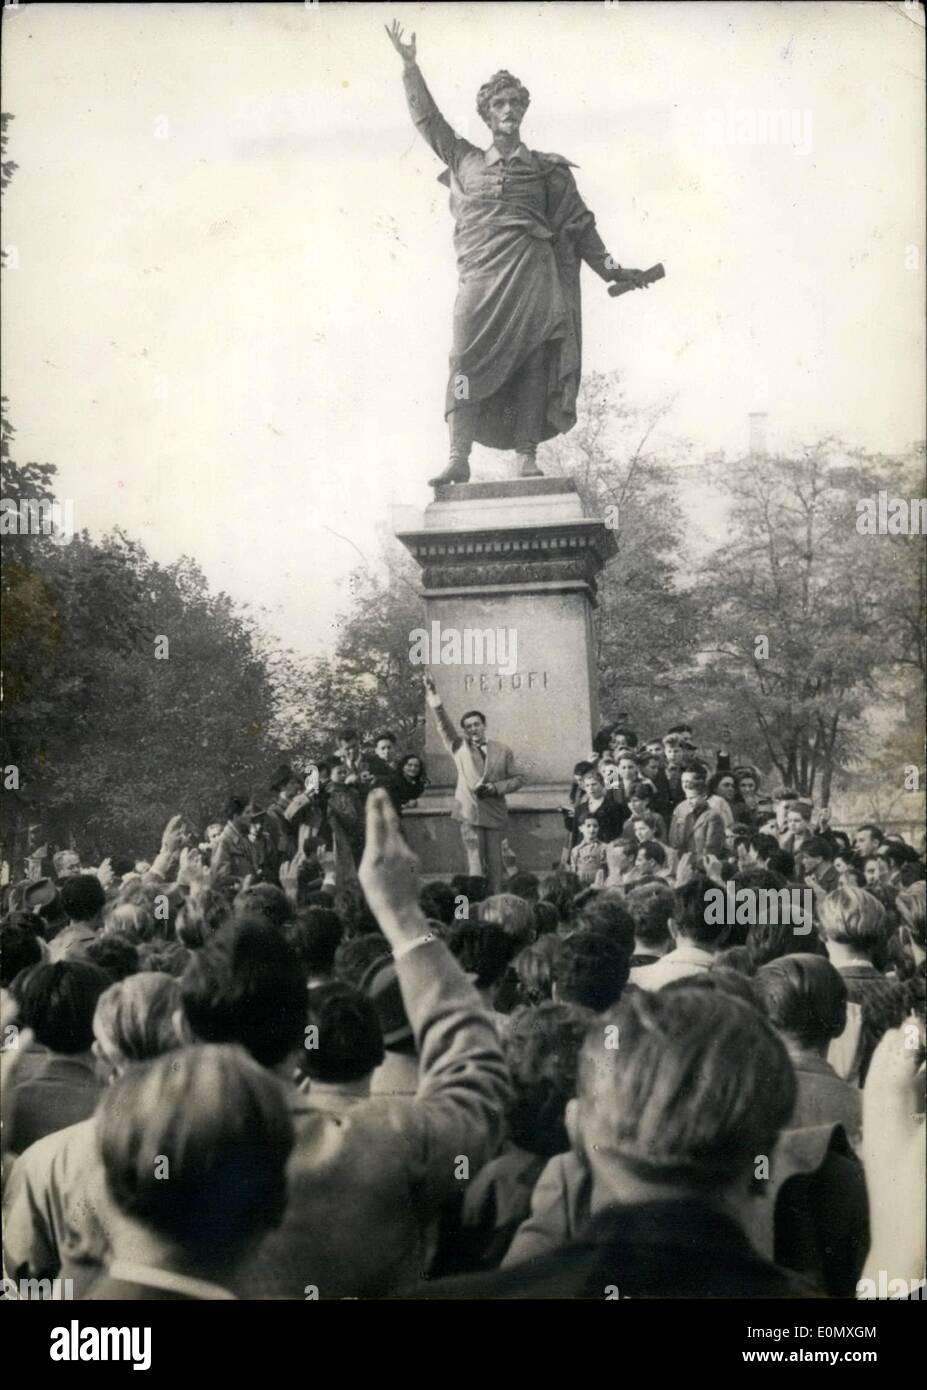 Oct. 10, 1956 - Hungarian Revolution: Where it all started... The statue of Alexander Petofi, greatest poet of Hungary at the banks of the Danube in Budapest. The Statue shows Petofi delivering his famous poem against tyranny ''We will be slaves no longer''. He died on the battlefield against the Russians in 1849. Photo Shows Students peacefully demonstrating on the eve of the revolution. Stock Photo